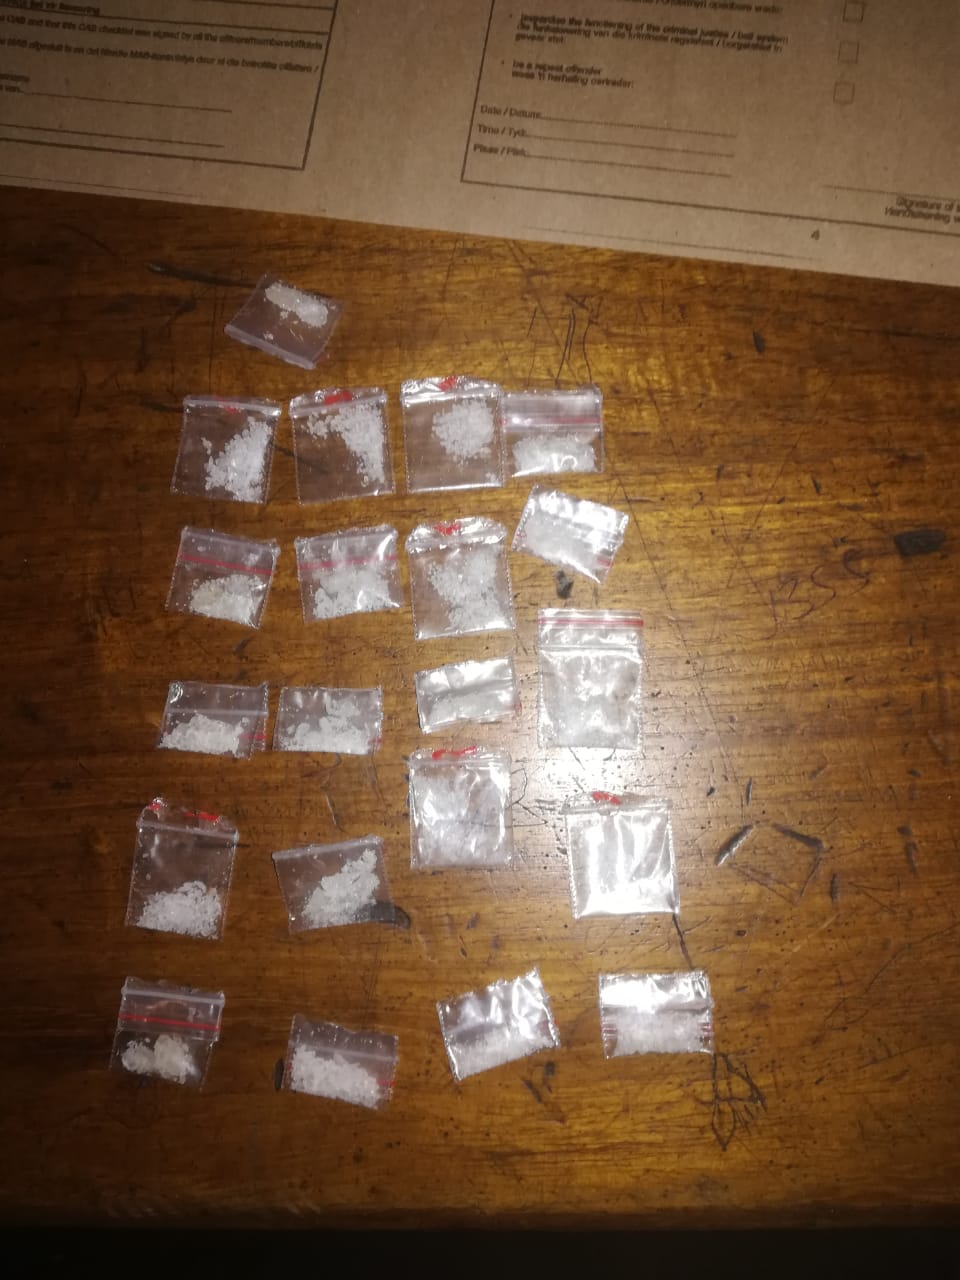 Drugs confiscated and suspects arrested in Elsies River